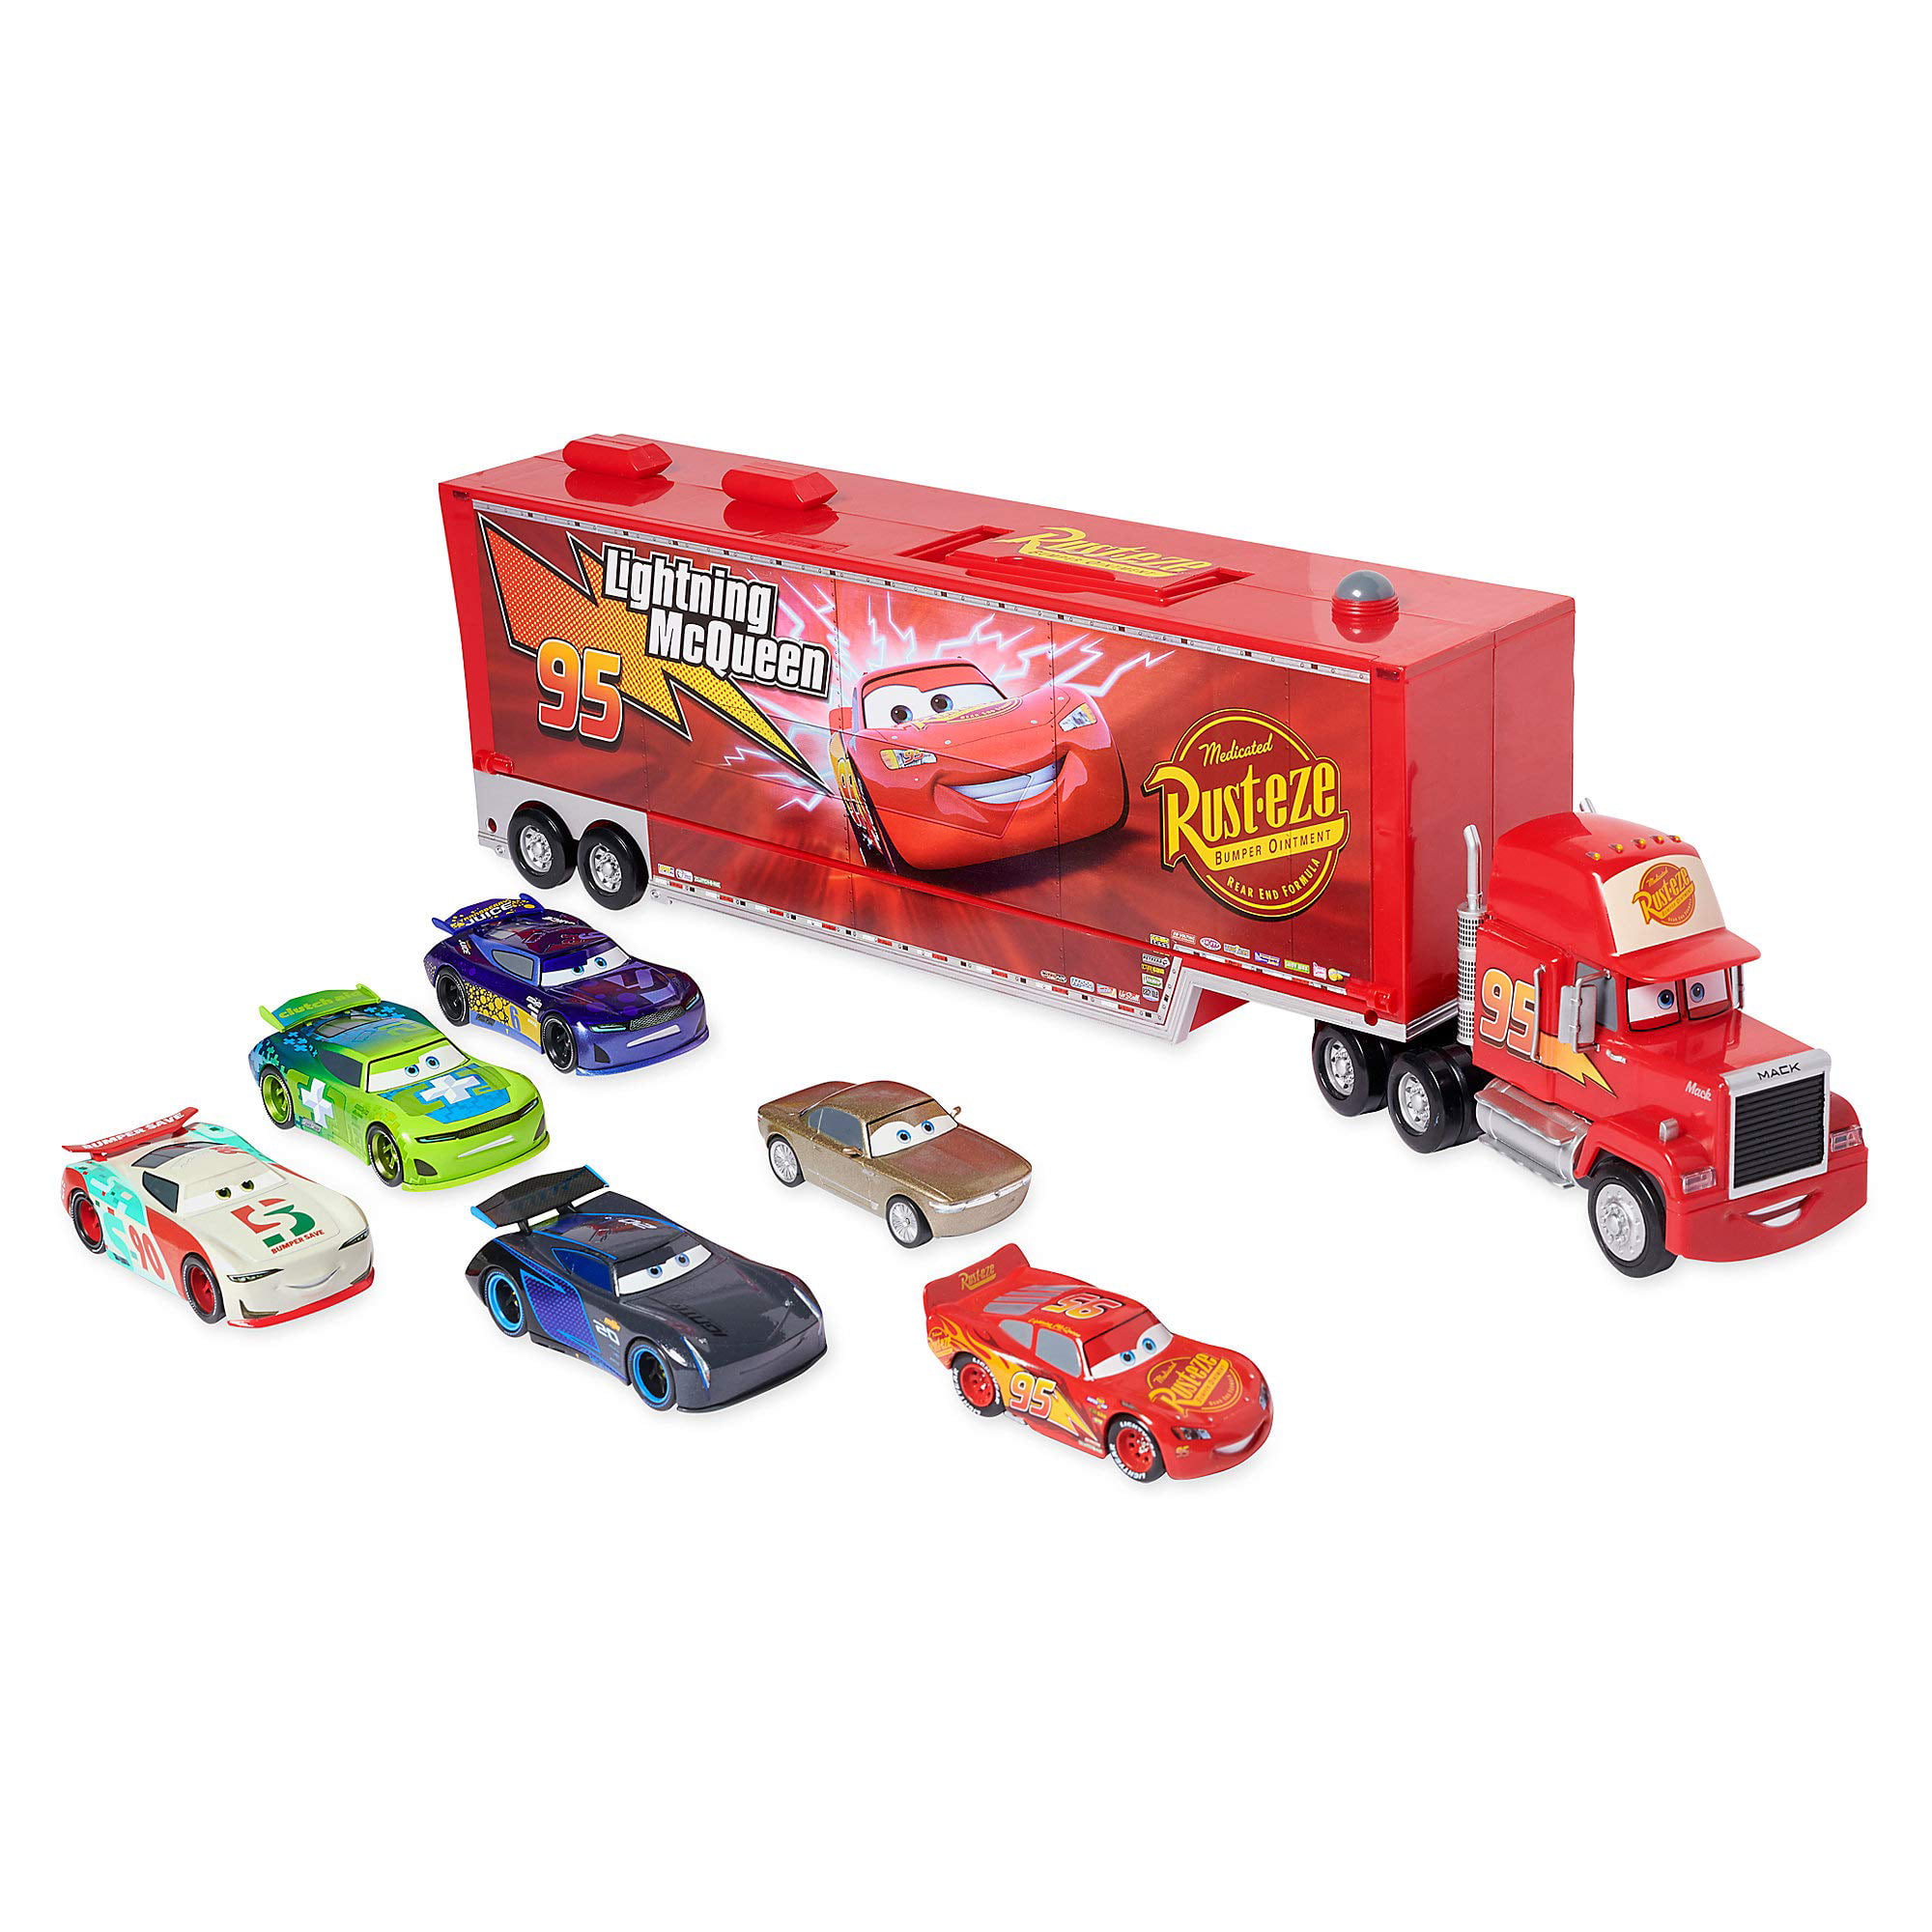 DISNEY PIXAR CARS MACK CARRIER WITH 5 DIECAST CARS 1:43 SCALE BRAND NEW 24" LONG 